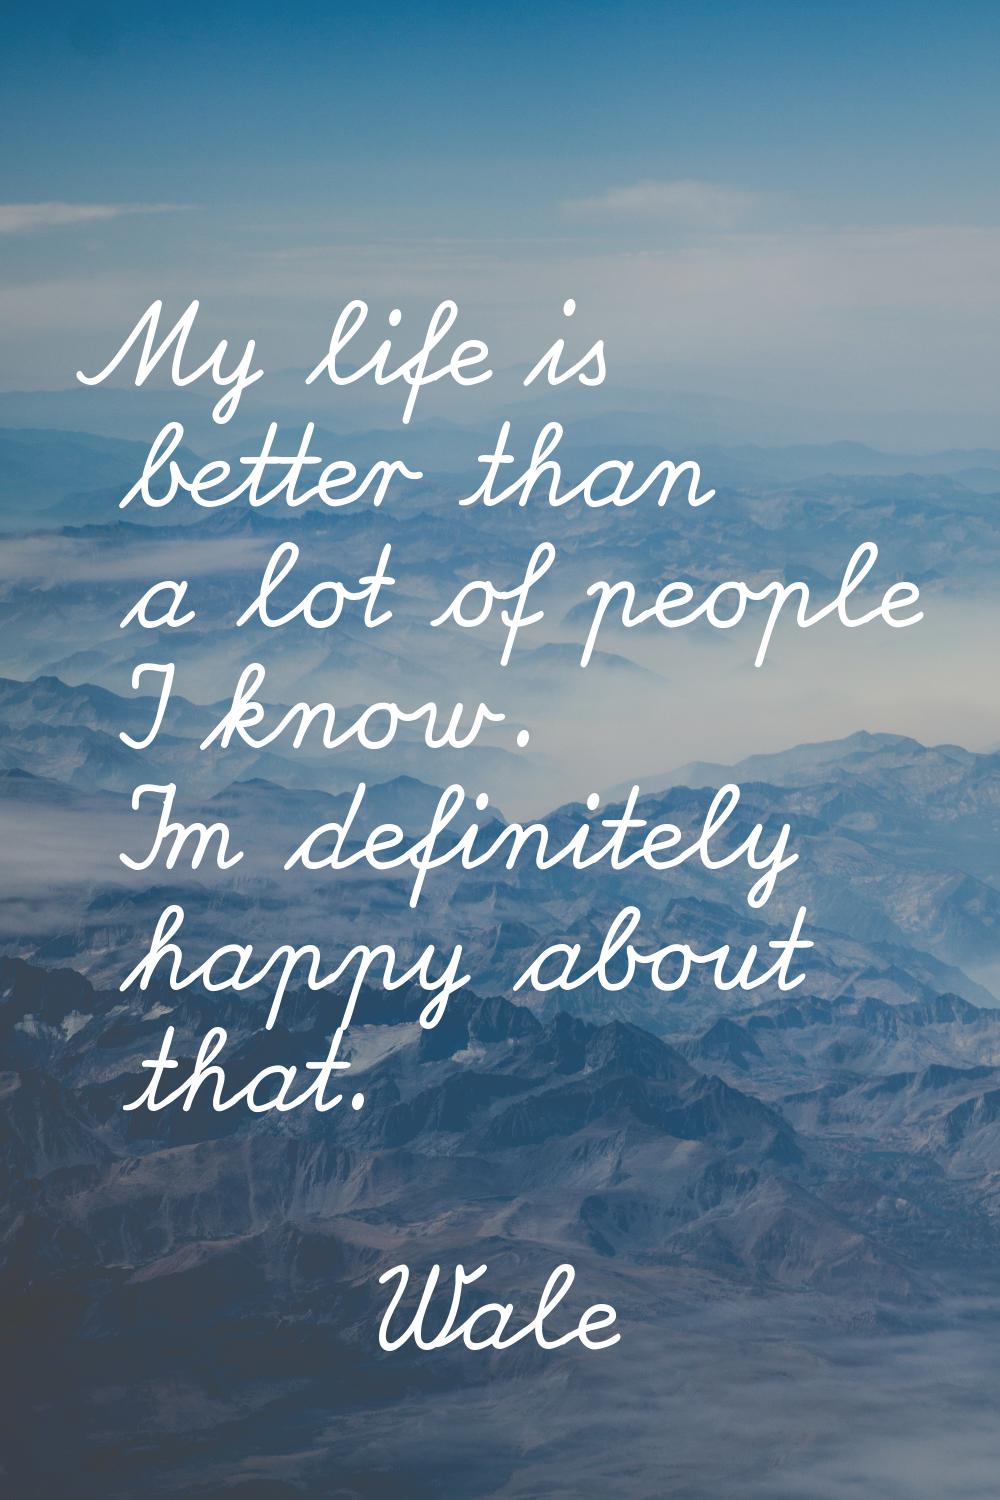 My life is better than a lot of people I know. I'm definitely happy about that.